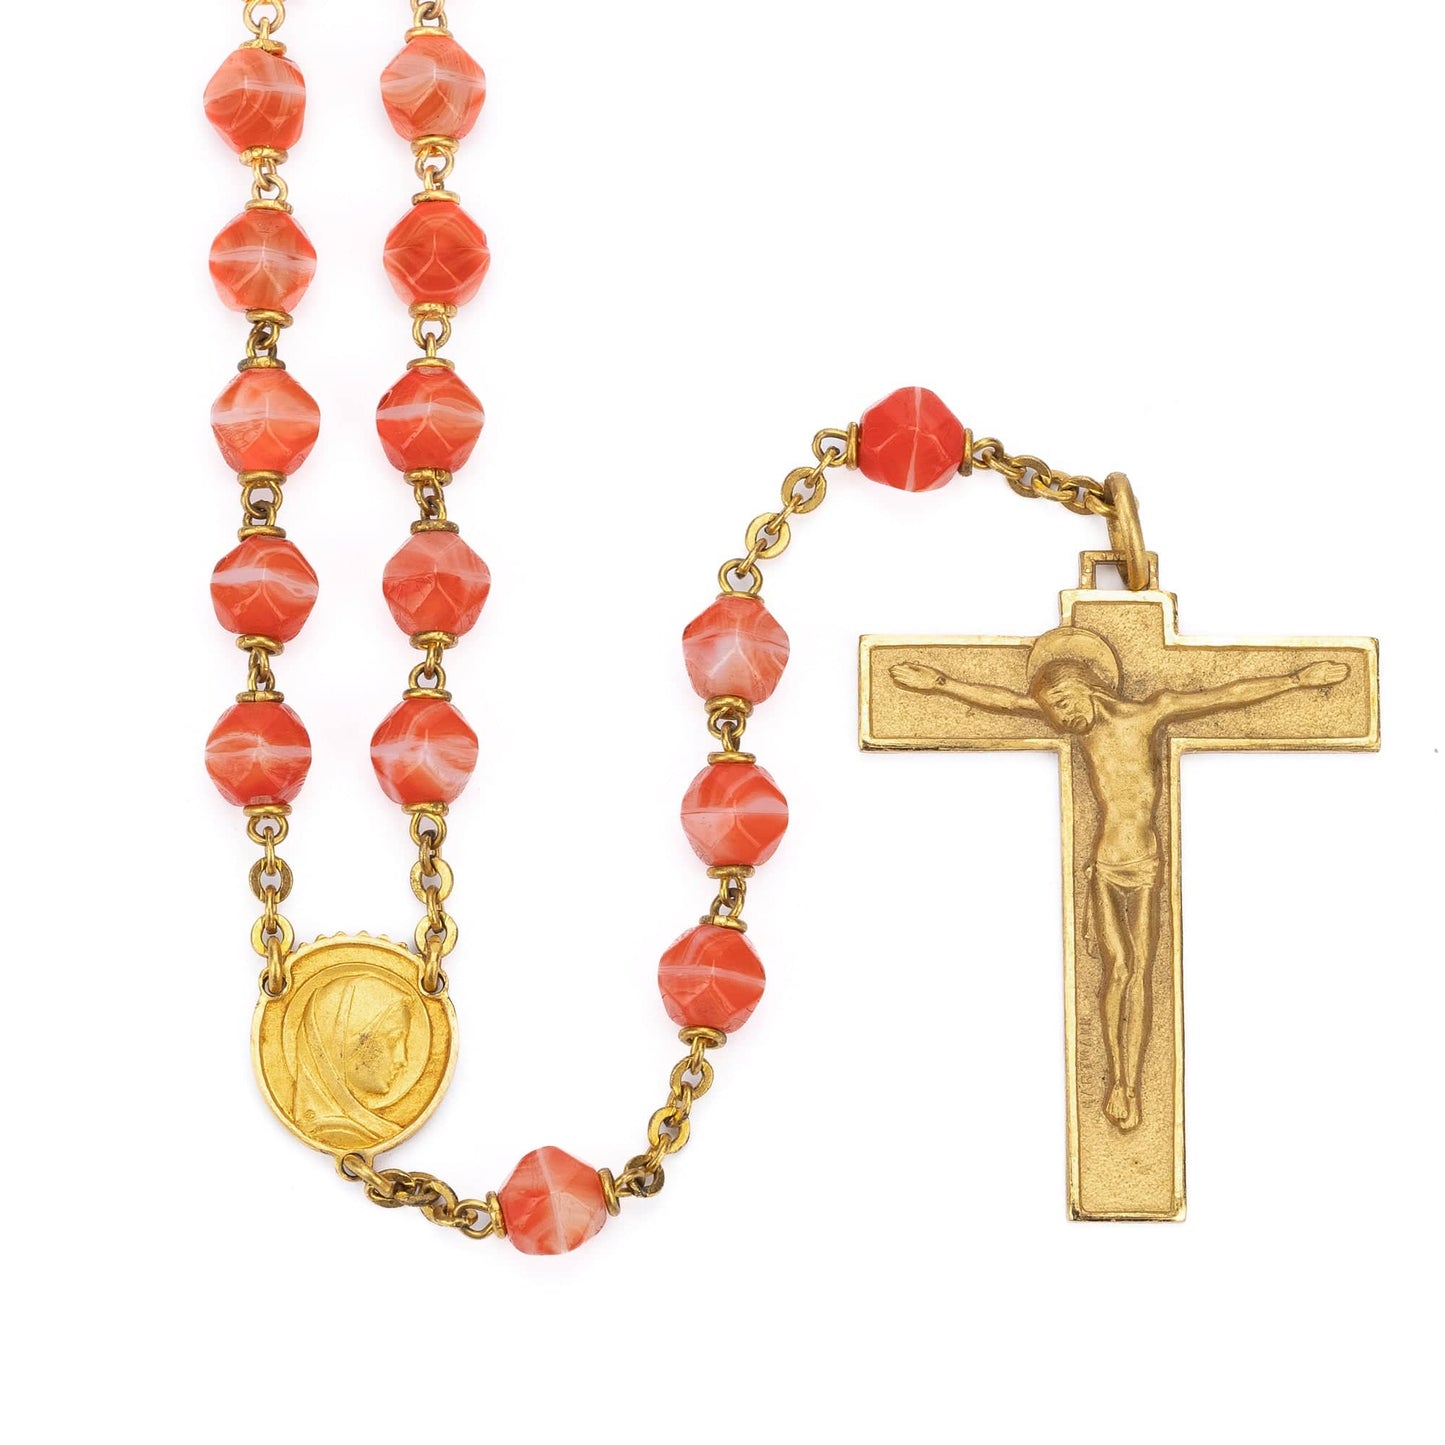 MONDO CATTOLICO Prayer Beads Traditional Orange Rosary Beads in Silver Gilt